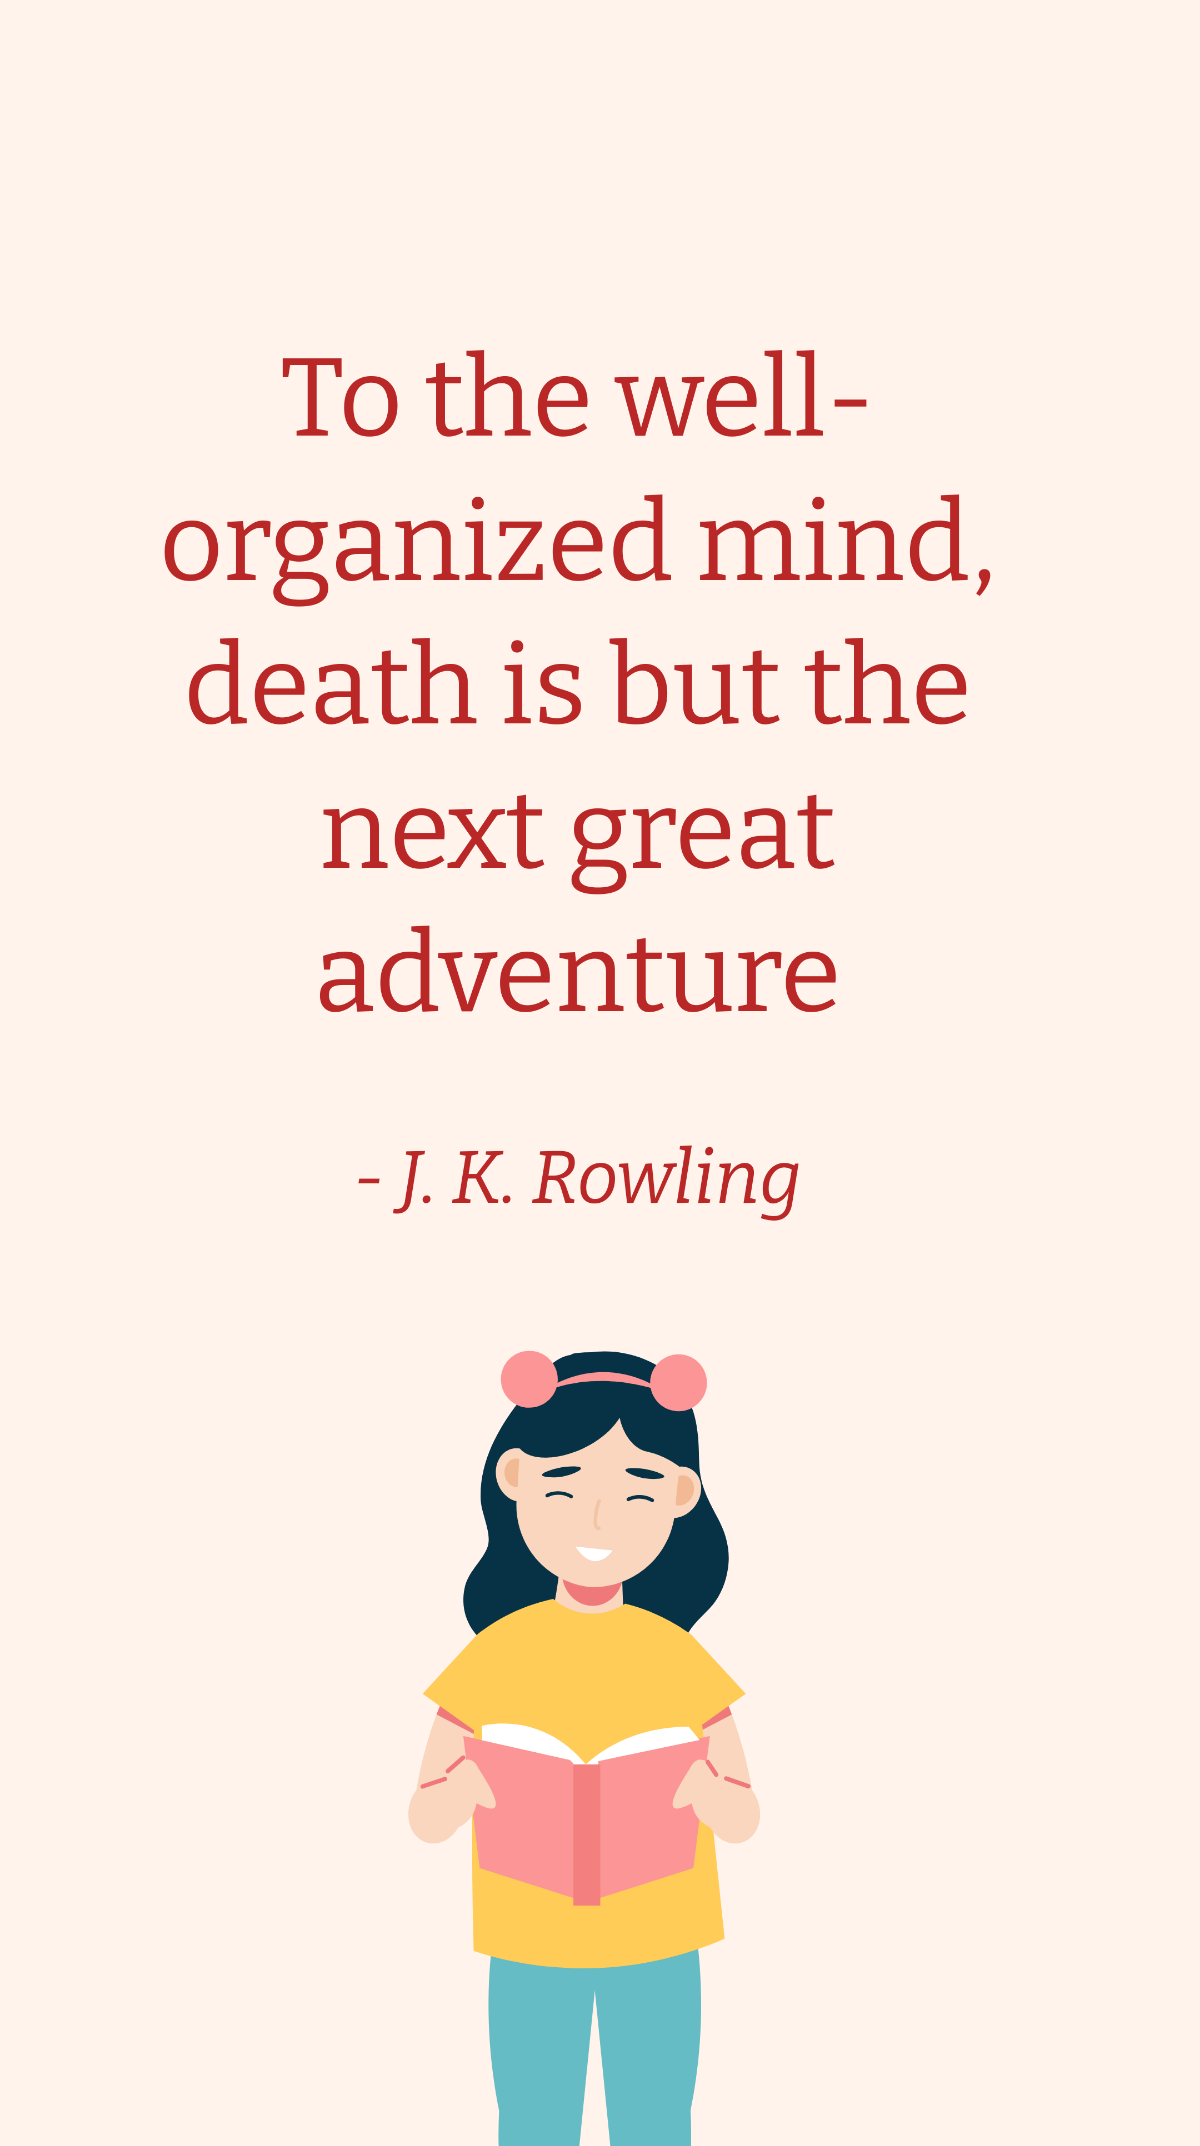 J. K. Rowling - To the well-organized mind, death is but the next great adventure Template